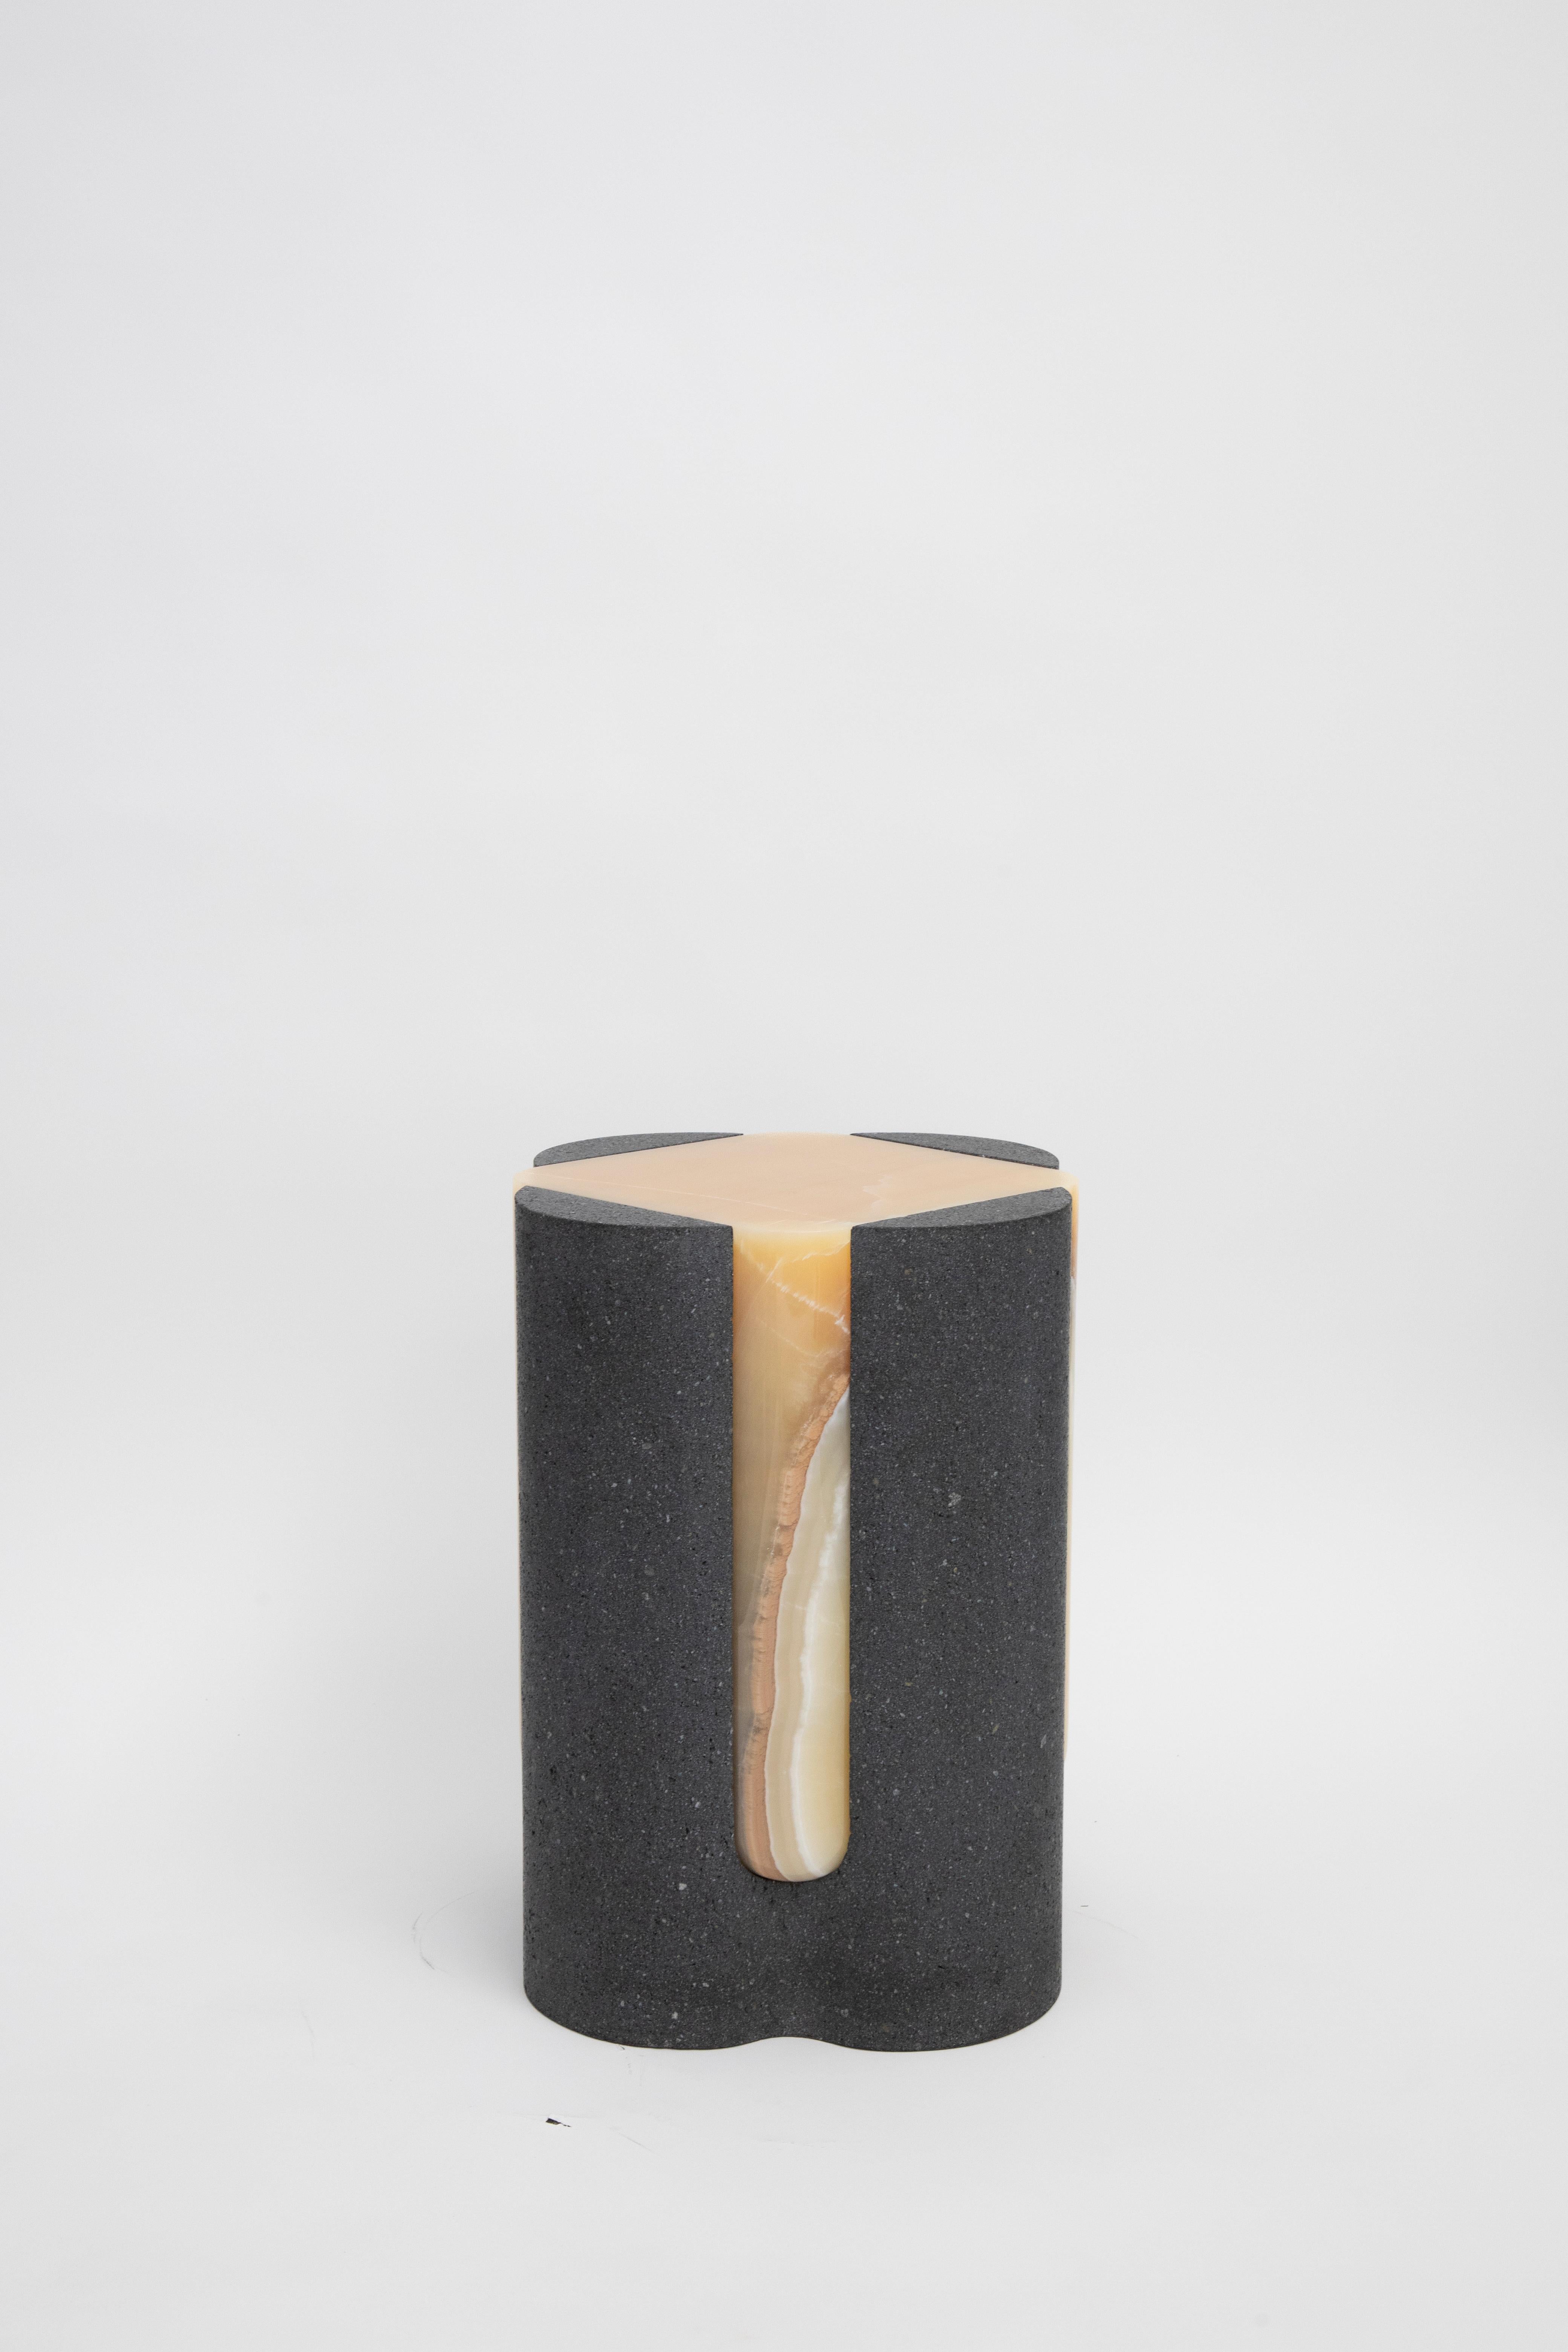 Materials: Lava stone and pineapple onyx
Indoors and outdoors
Side table / Stool

Through an abstract geometric language where cubes and cylinders playfully alternate, these stools represent the millenary connections existing inside the Earth; they